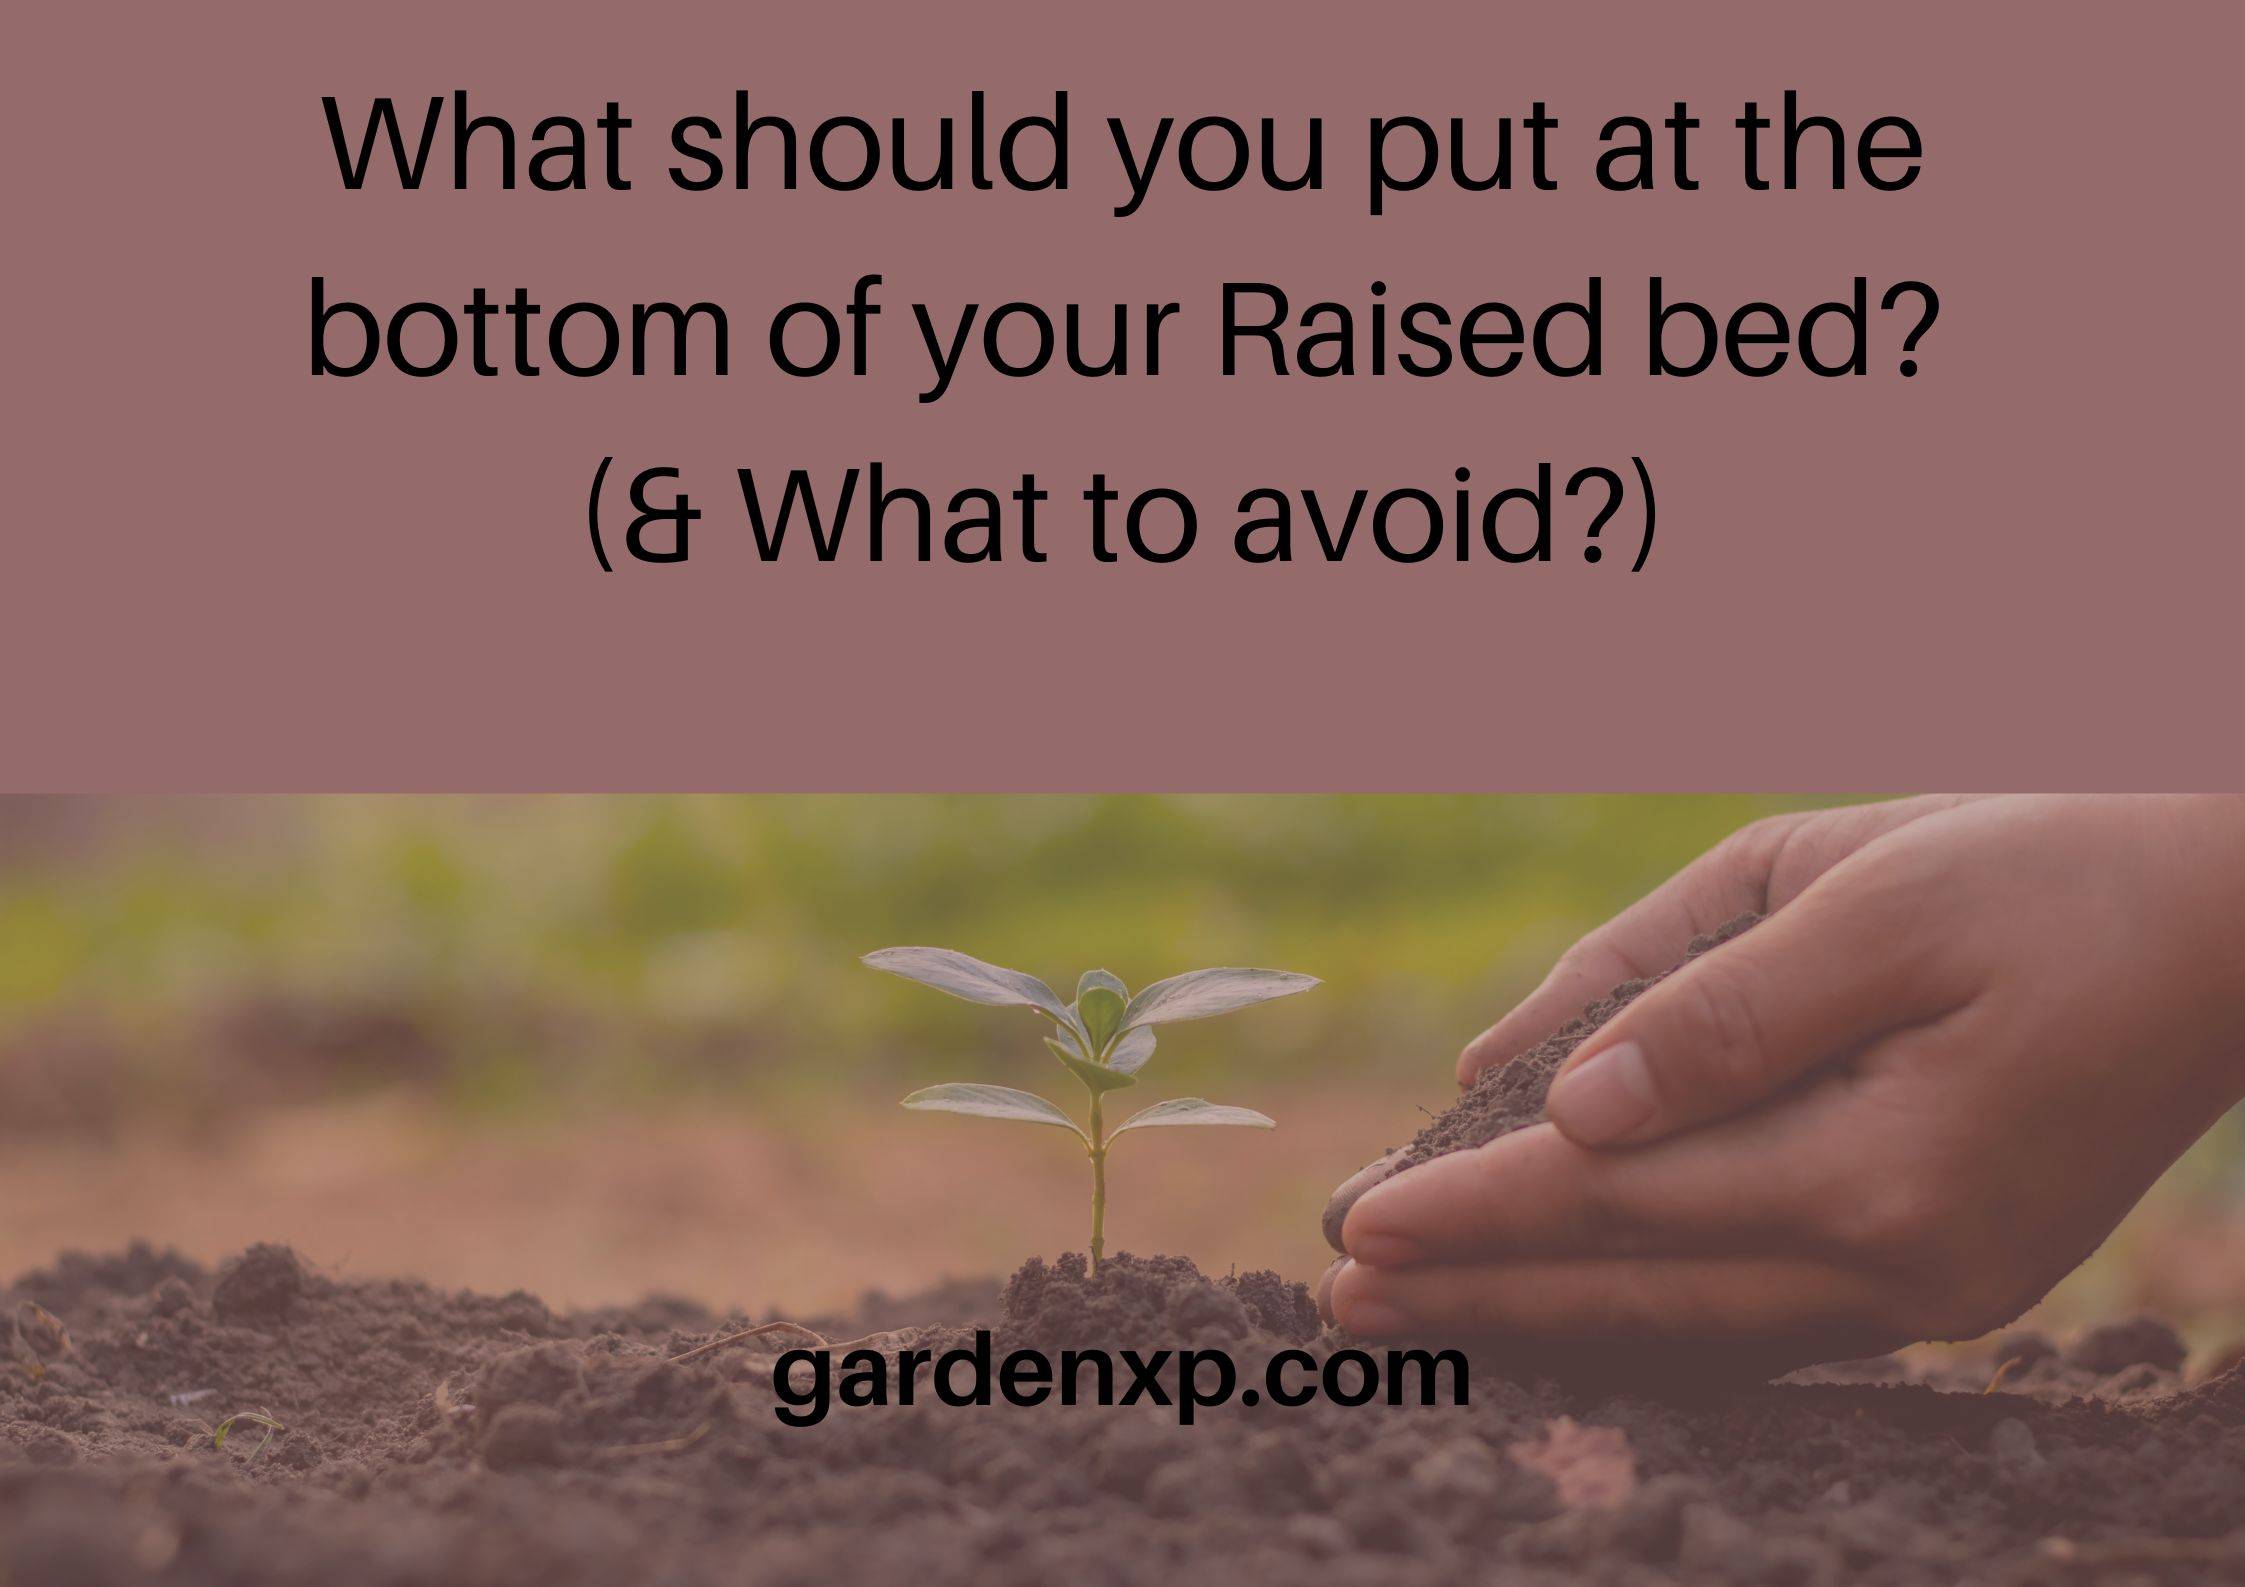 What should you put at the bottom of your Raised bed? (& What to avoid?)